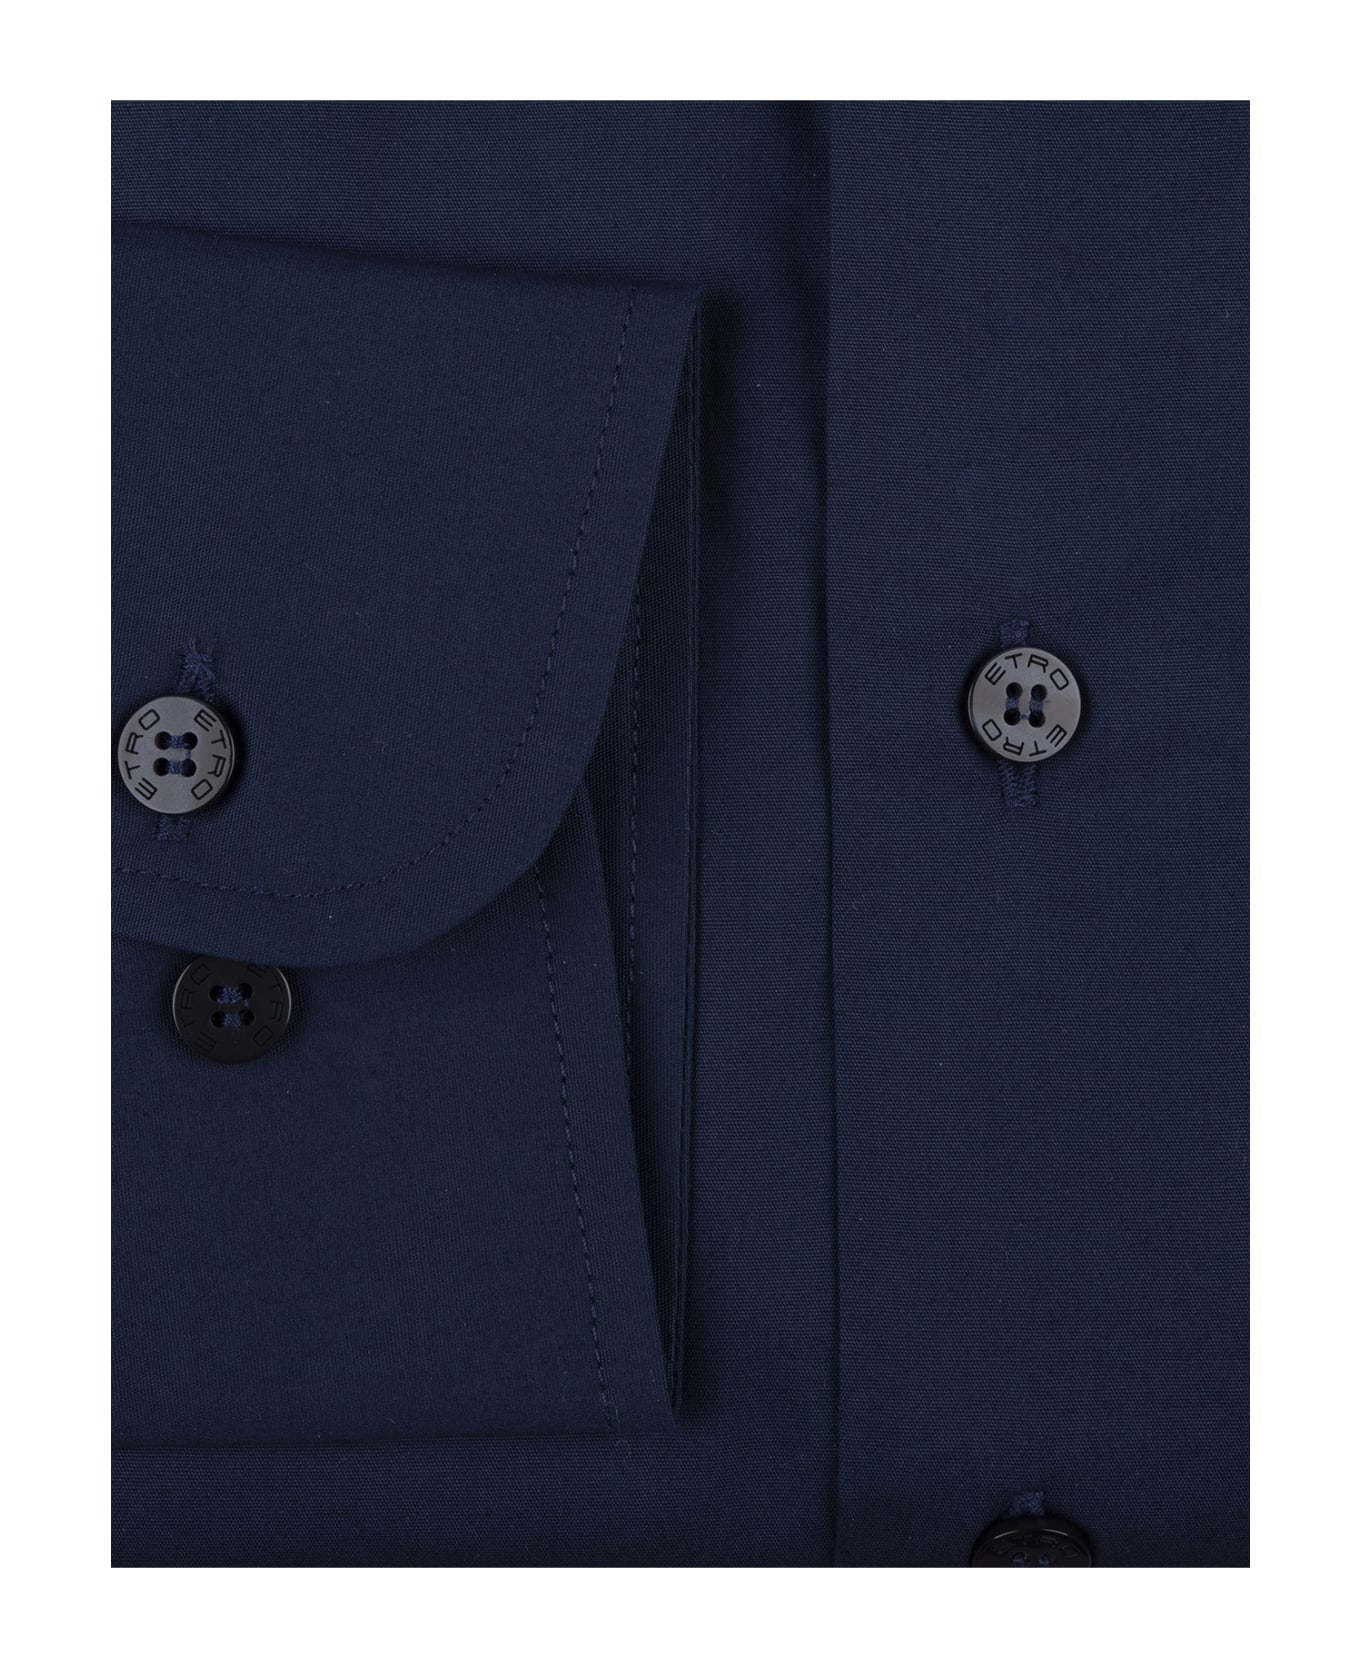 Etro Navy Blue Shirt With Embroidered Logo And Printed Undercollar - Blue